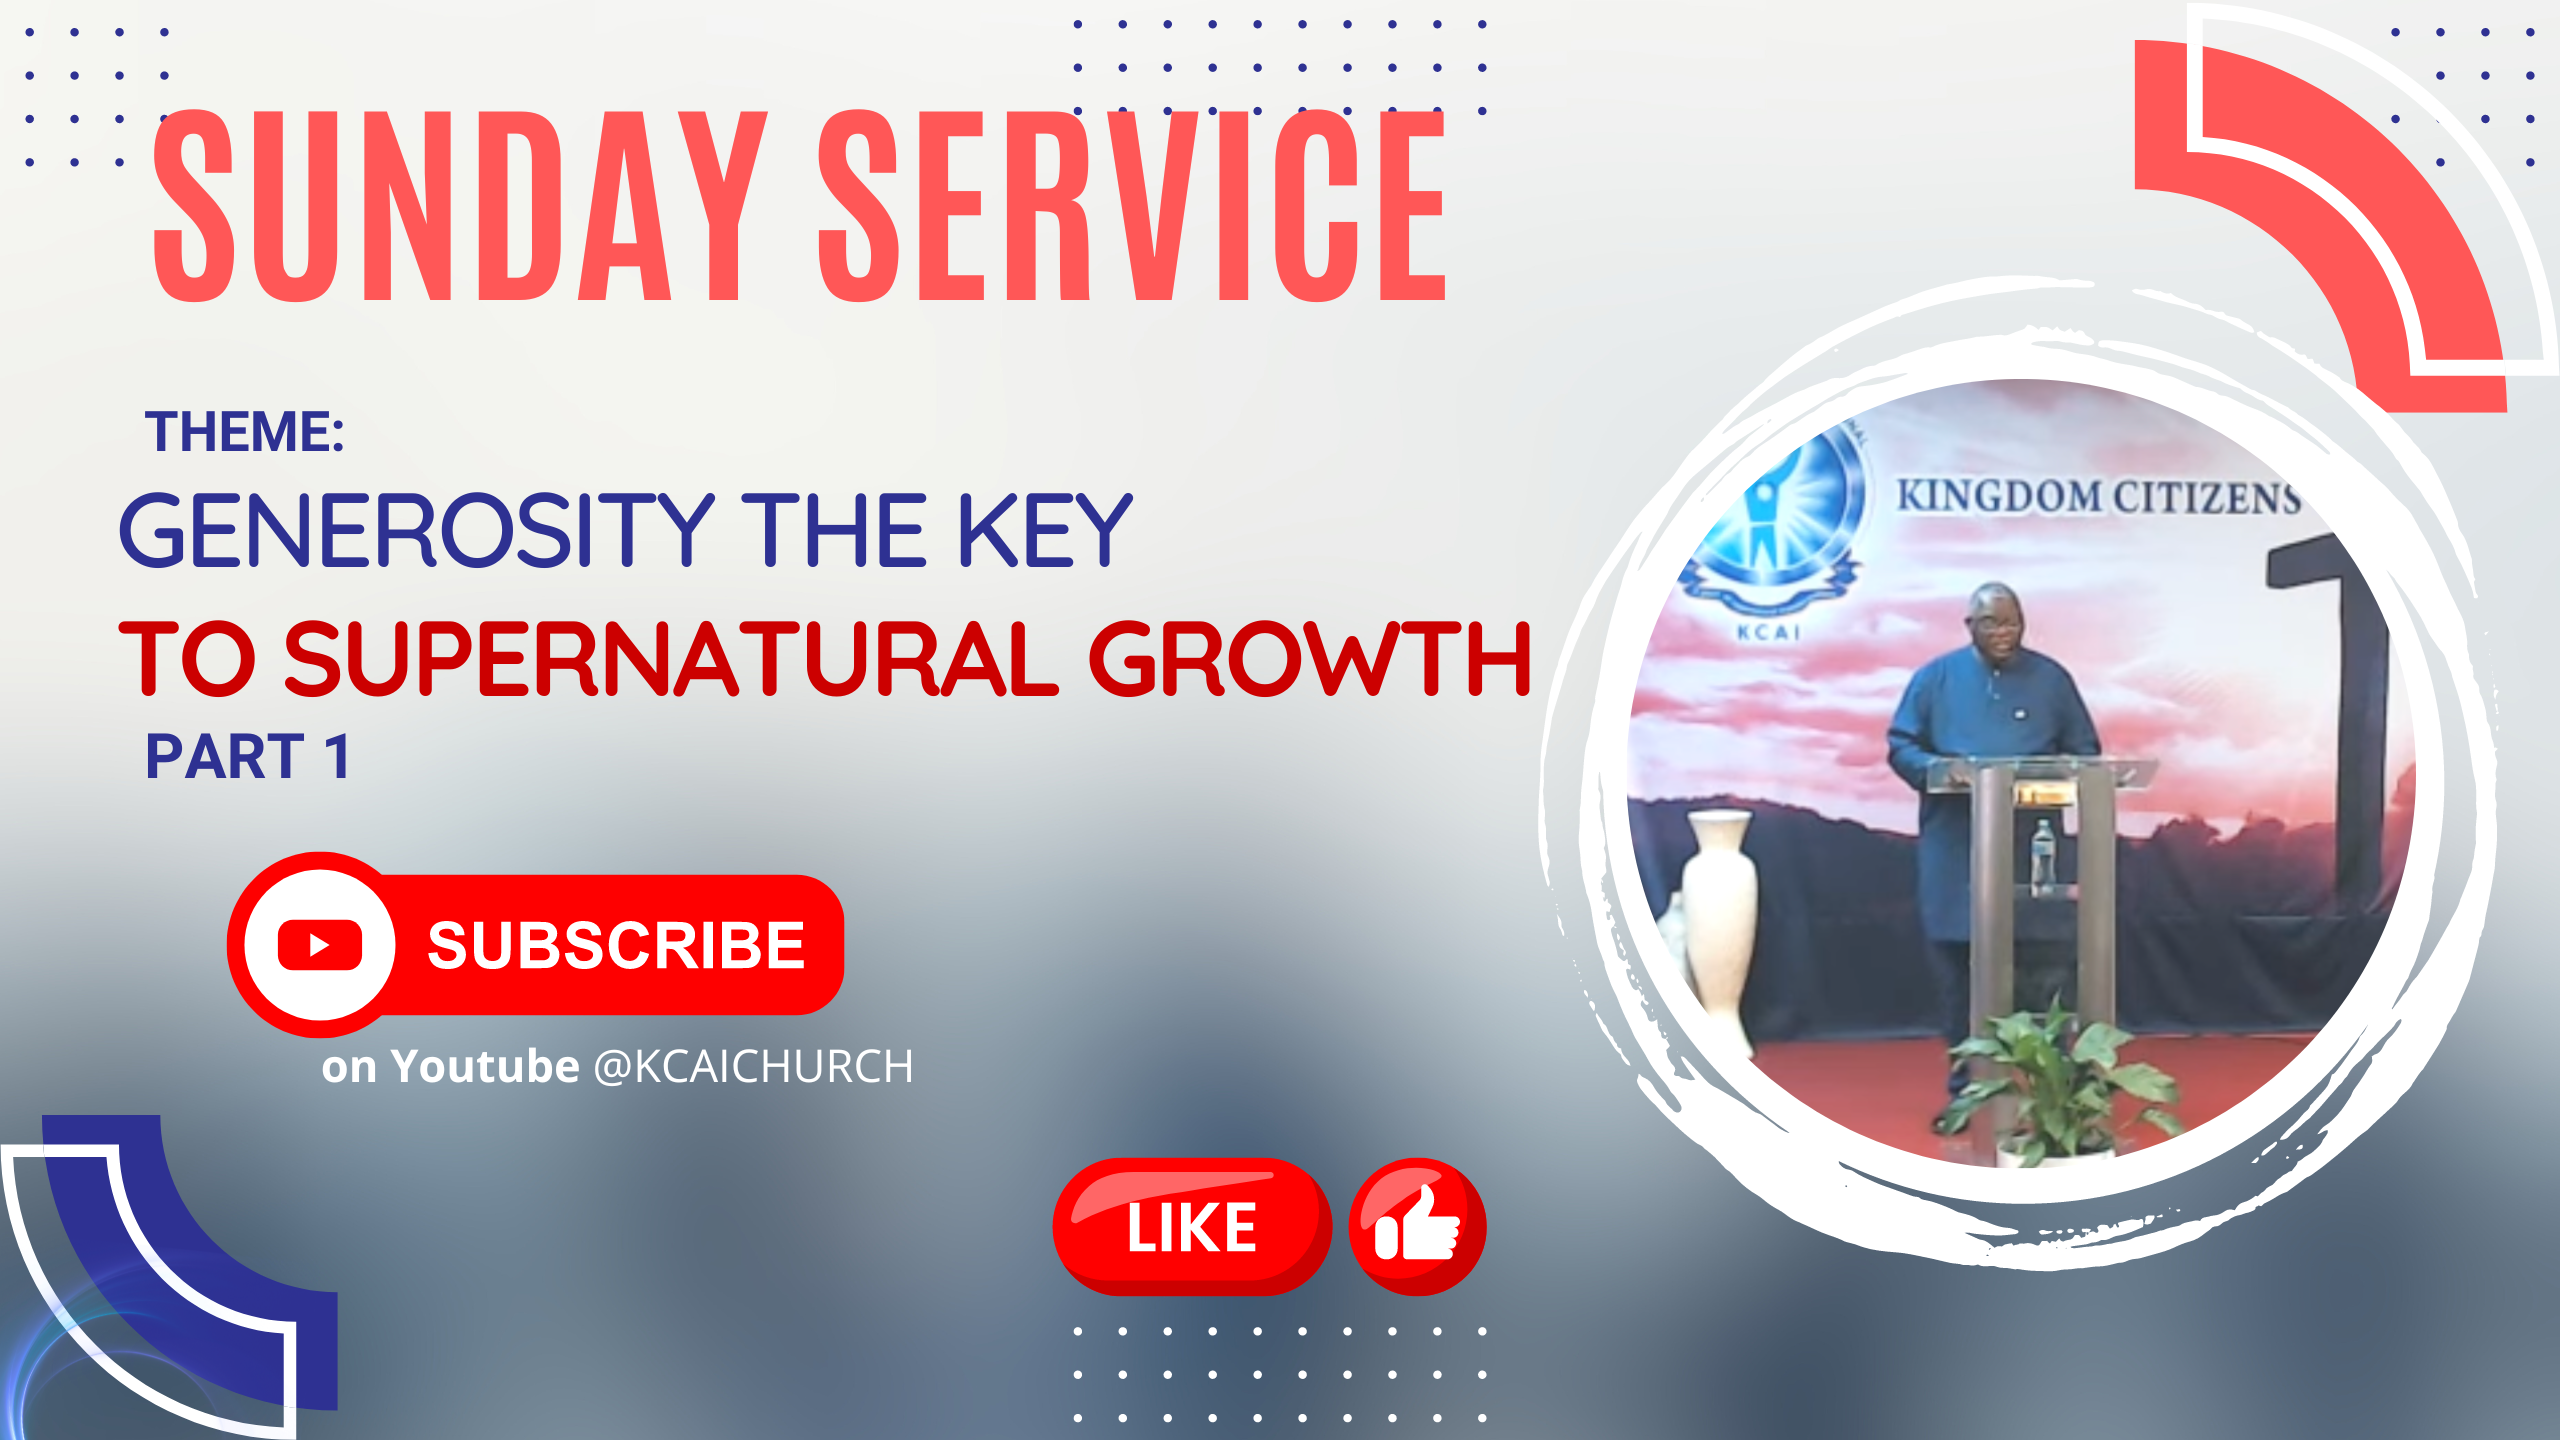 GENEROSITY THE KEY tO SUPERNATURAL GROWTH - PART 1